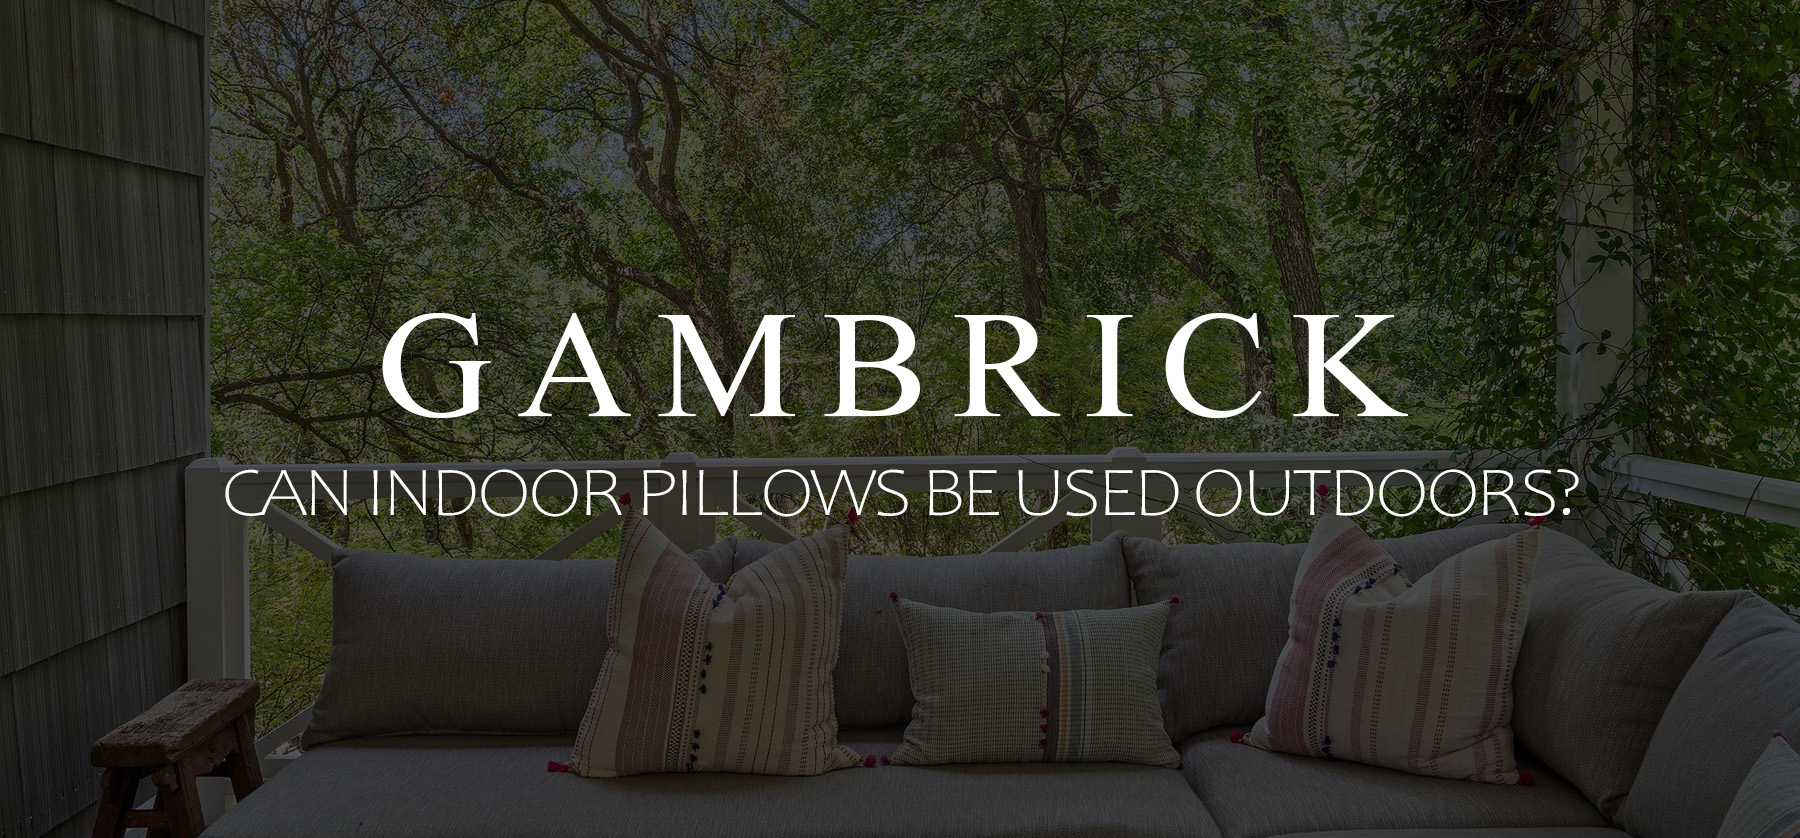 Can Indoor Pillows Be Used Outdoors Banner 1